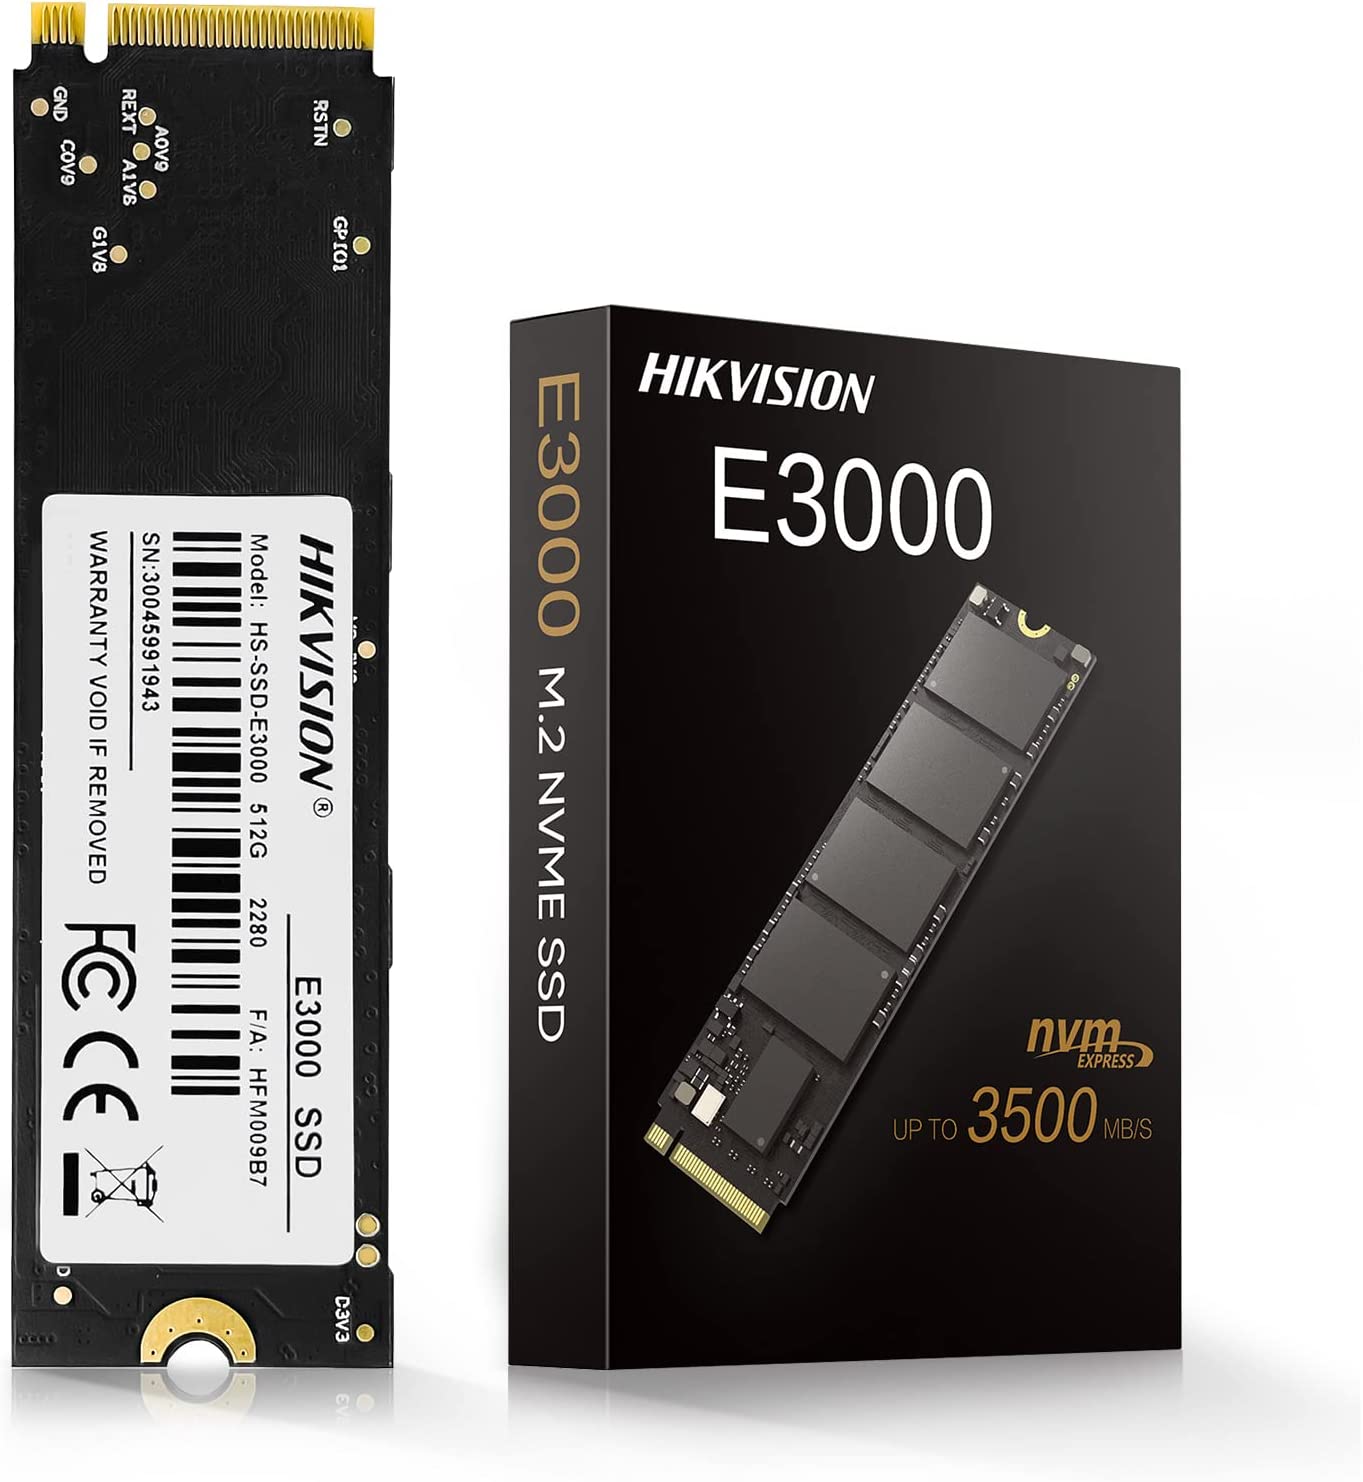 SSD HIKVISION 512gb E3000 M2 Nvme 3500MB/s